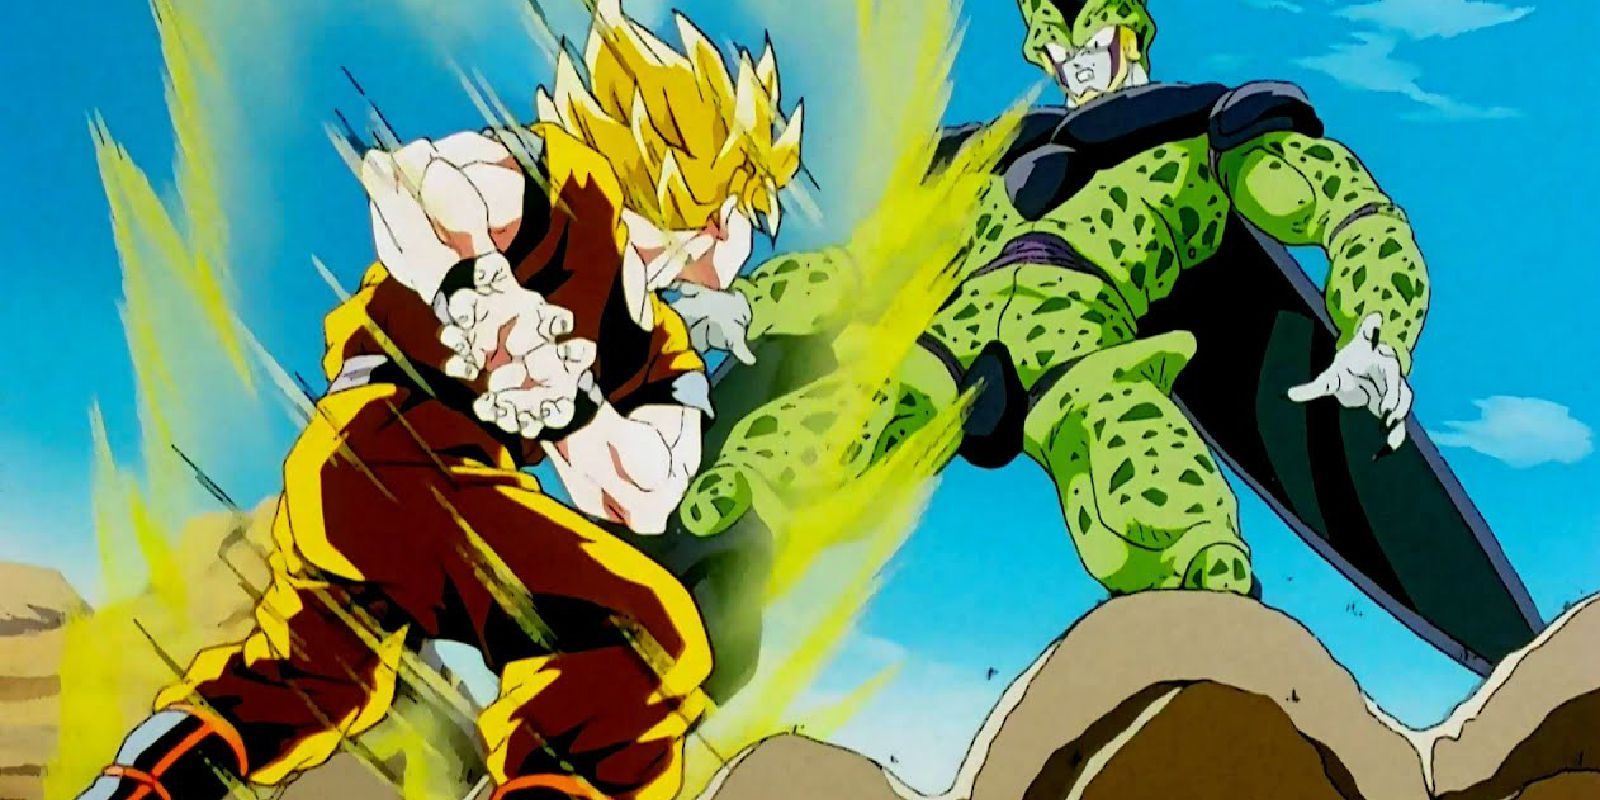 Goku uses instant transmission to take cell by surprise in Dragon Ball z